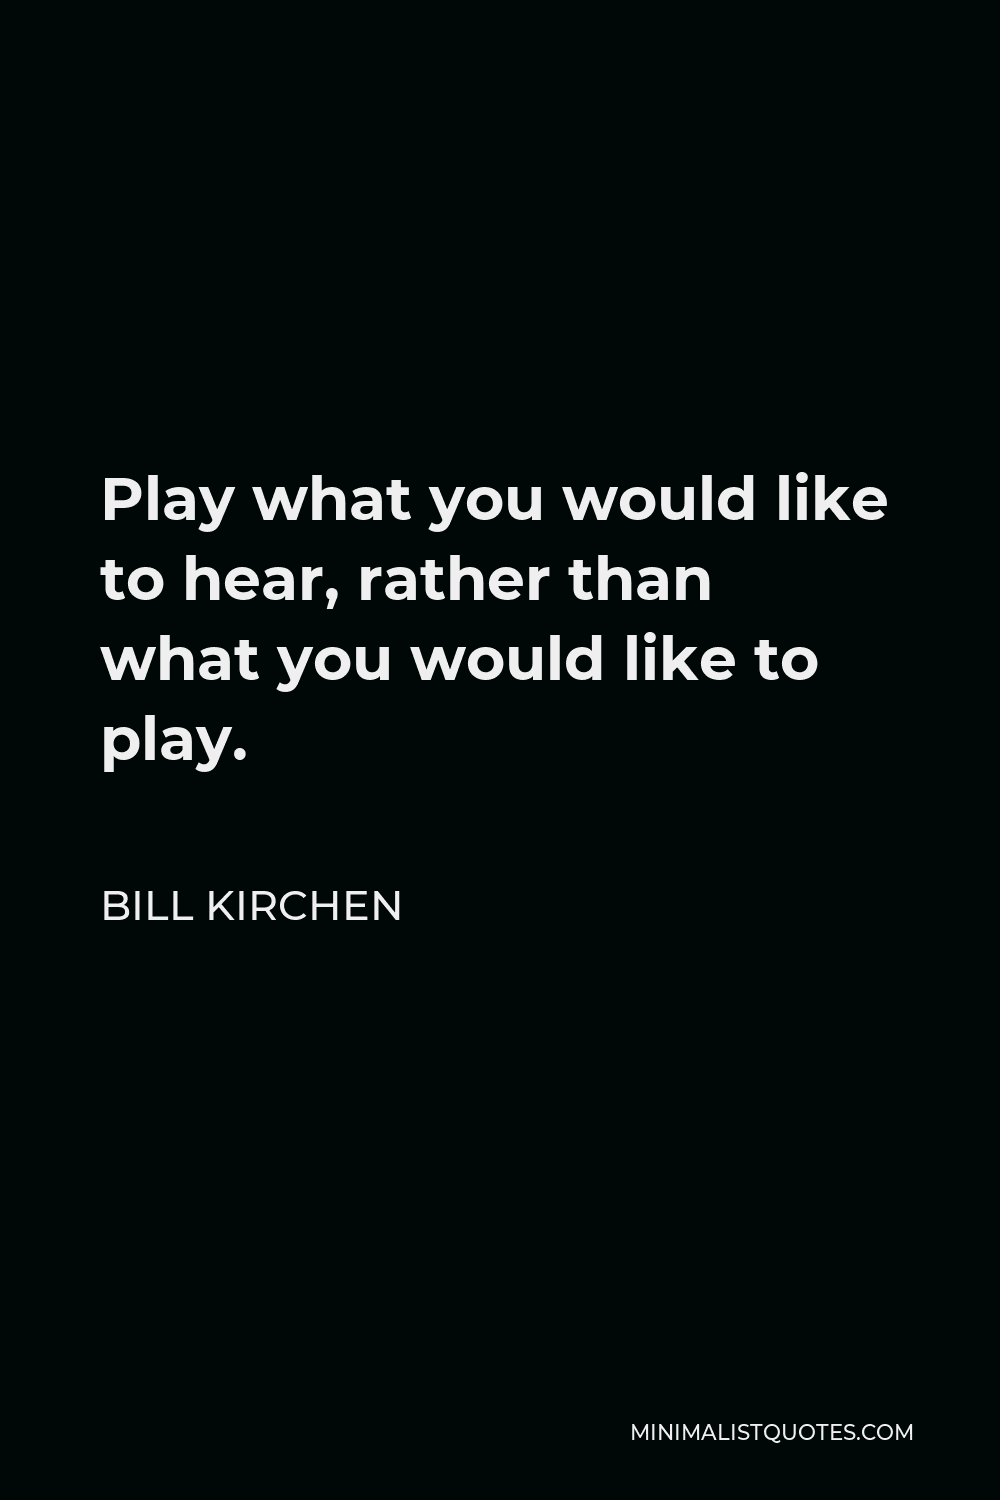 Bill Kirchen Quote - Play what you would like to hear, rather than what you would like to play.